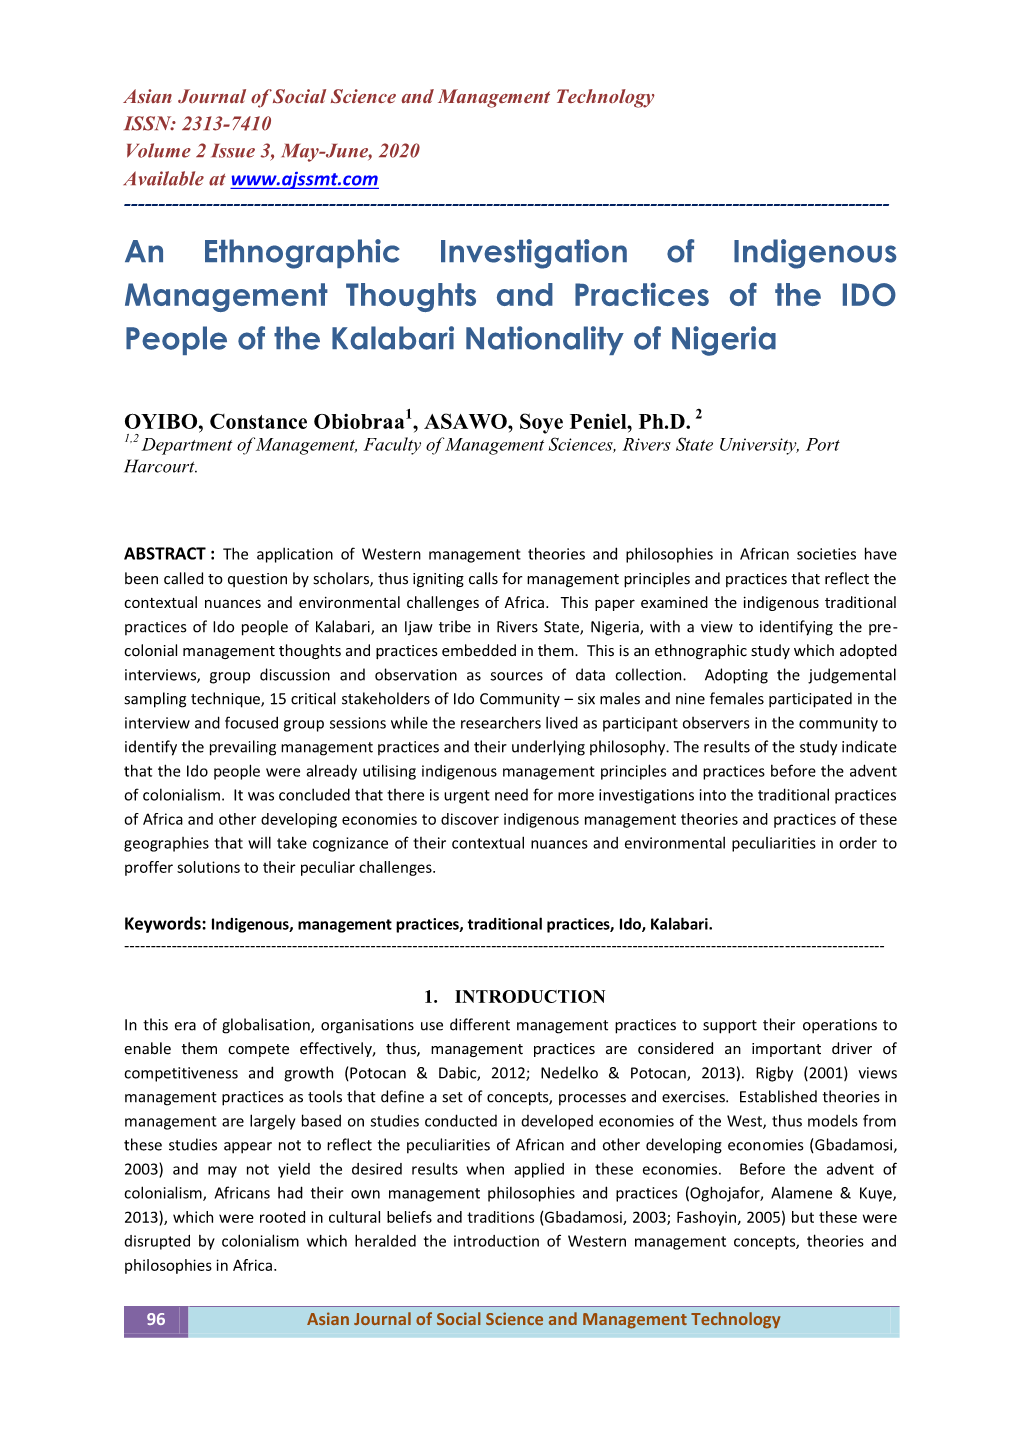 An Ethnographic Investigation of Indigenous Management Thoughts and Practices of the IDO People of the Kalabari Nationality of Nigeria